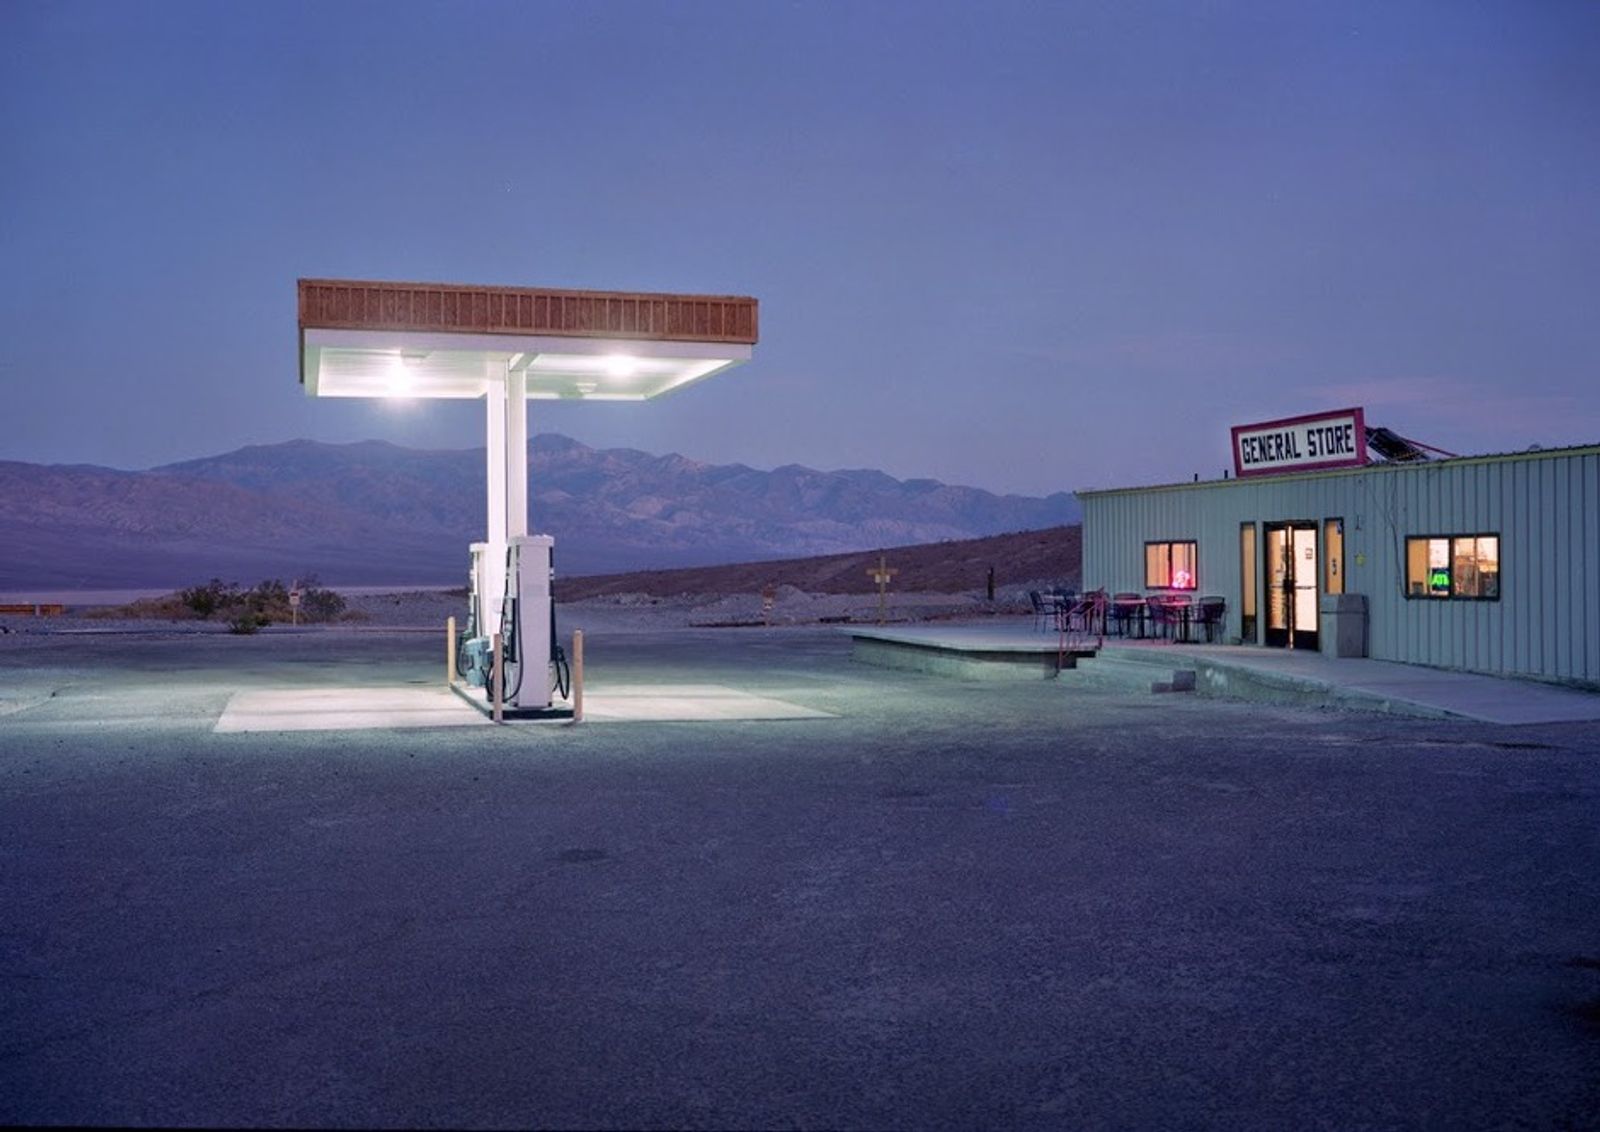 © Marcus Doyle - Gas Pump and store. Pannamint Springs.